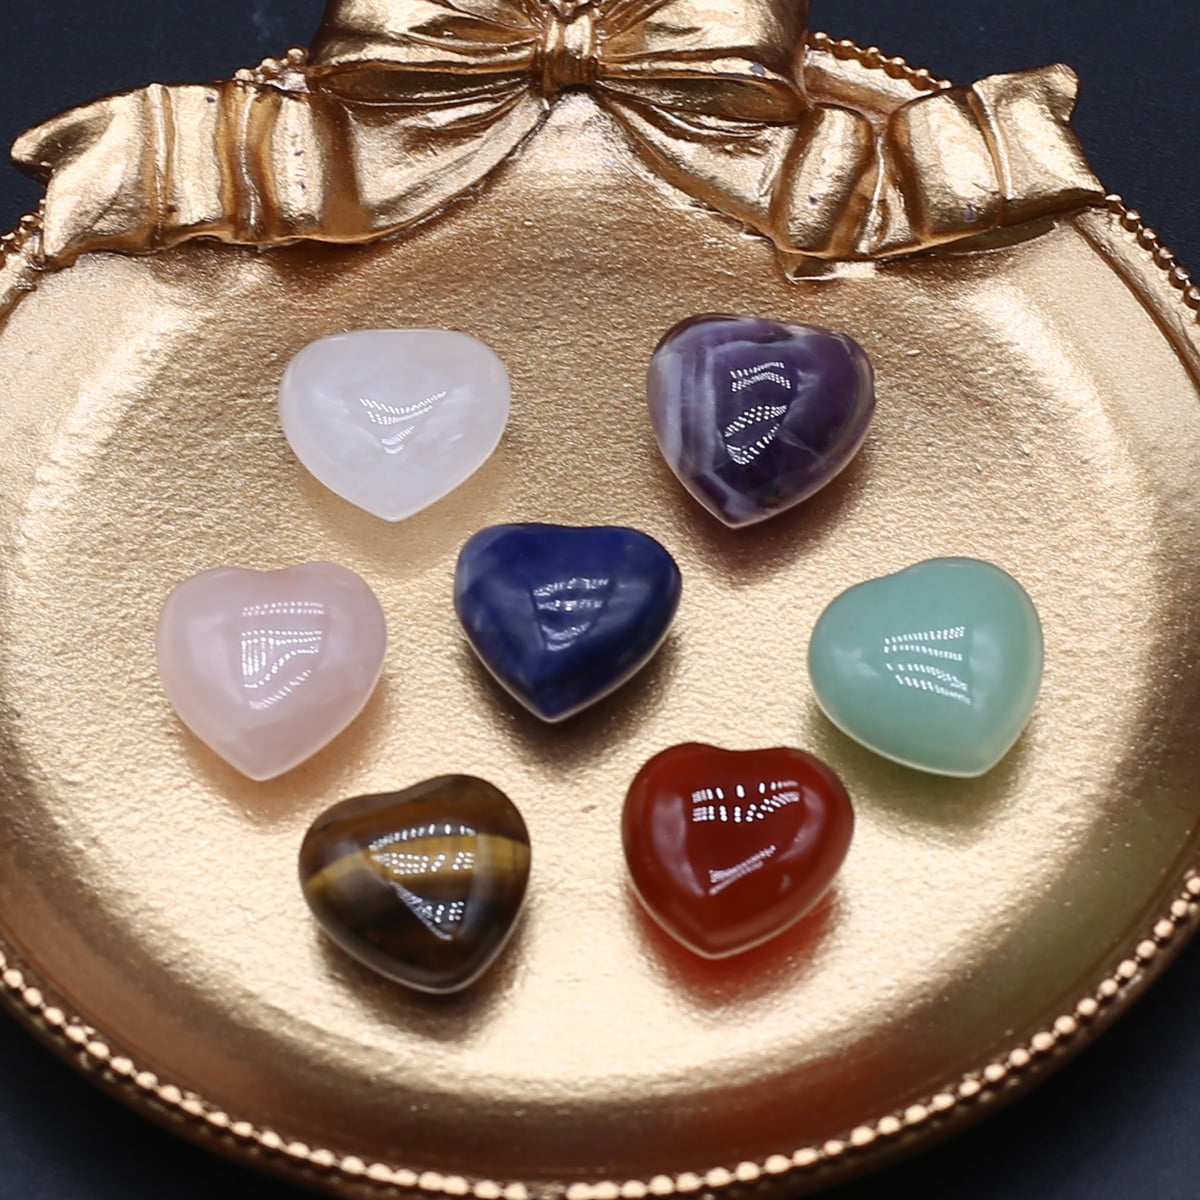 Bomutovy 20 Pcs Heart Shaped Gemstones Crystal Worry Stones Bulk Rocks 0.8  inch Mini Love Carved Stones Pocket Palm Thumb Gemstones for Witchcraft